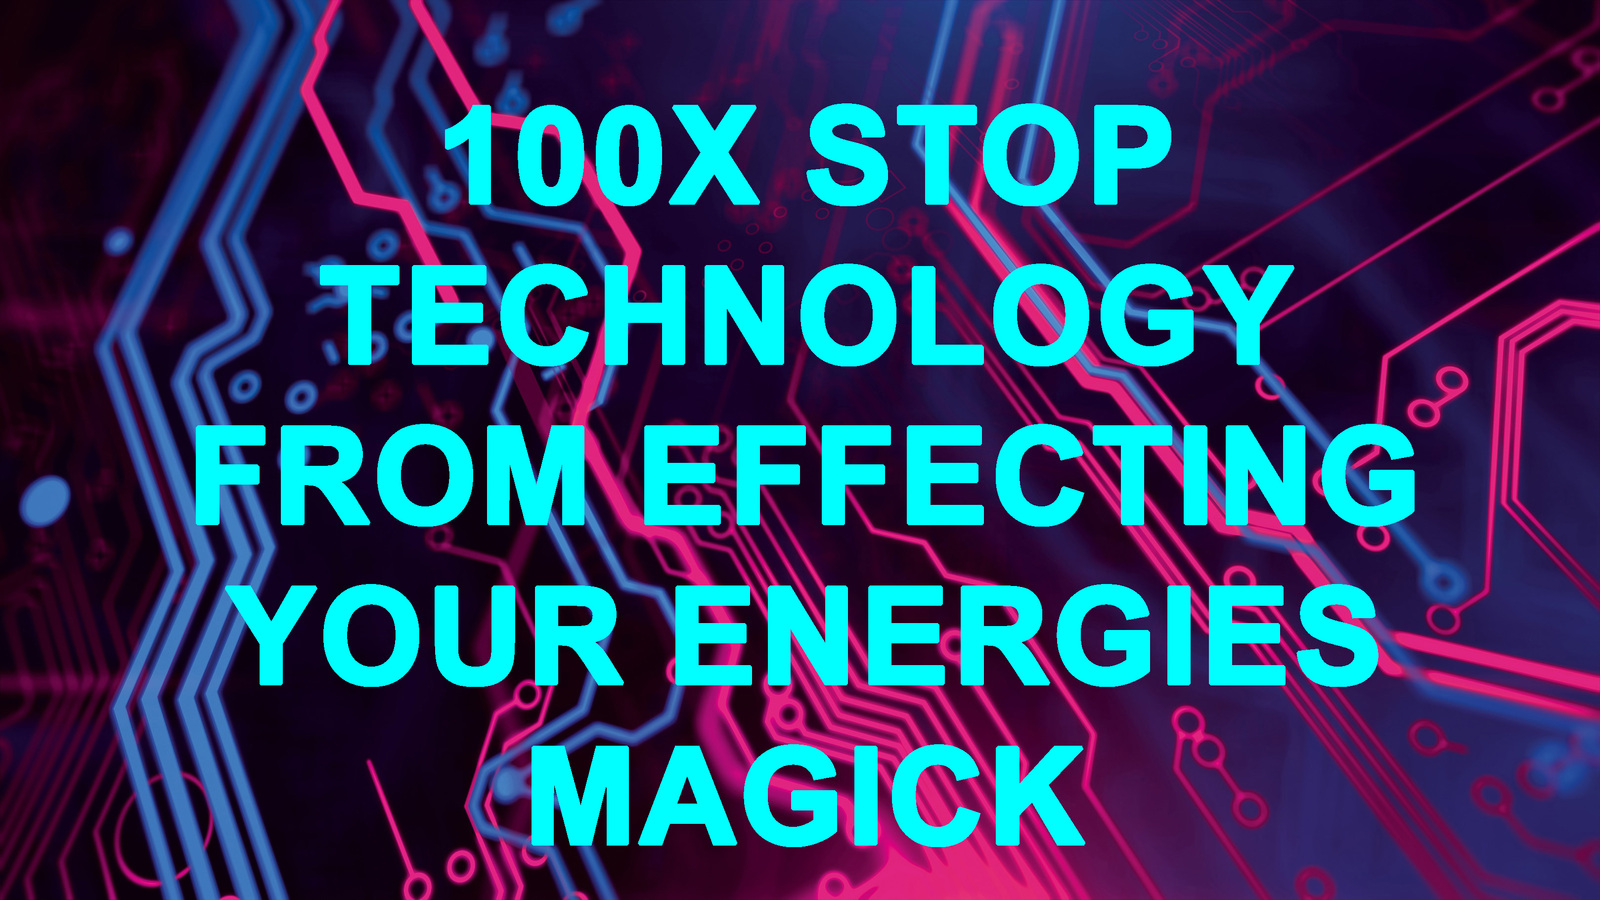 100X MASTER STOP THE NEGATIVE EFFECTS OF TECHNOLOGY ON YOU & MAGICK COVEN WORK